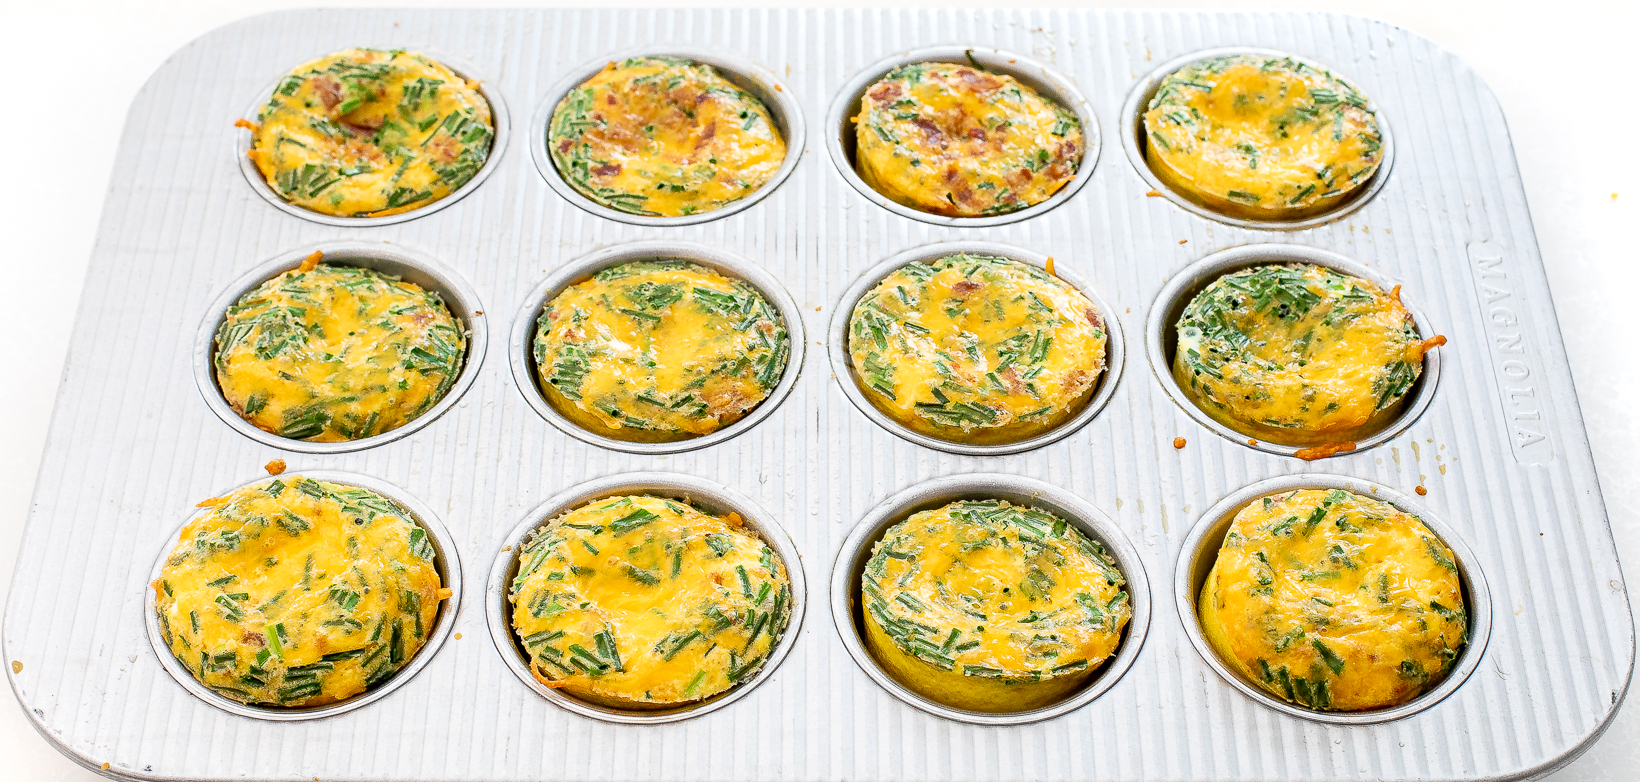 https://chefsavvy.com/wp-content/uploads/bacon-egg-cheese-cups-in-muffin-tin.jpg